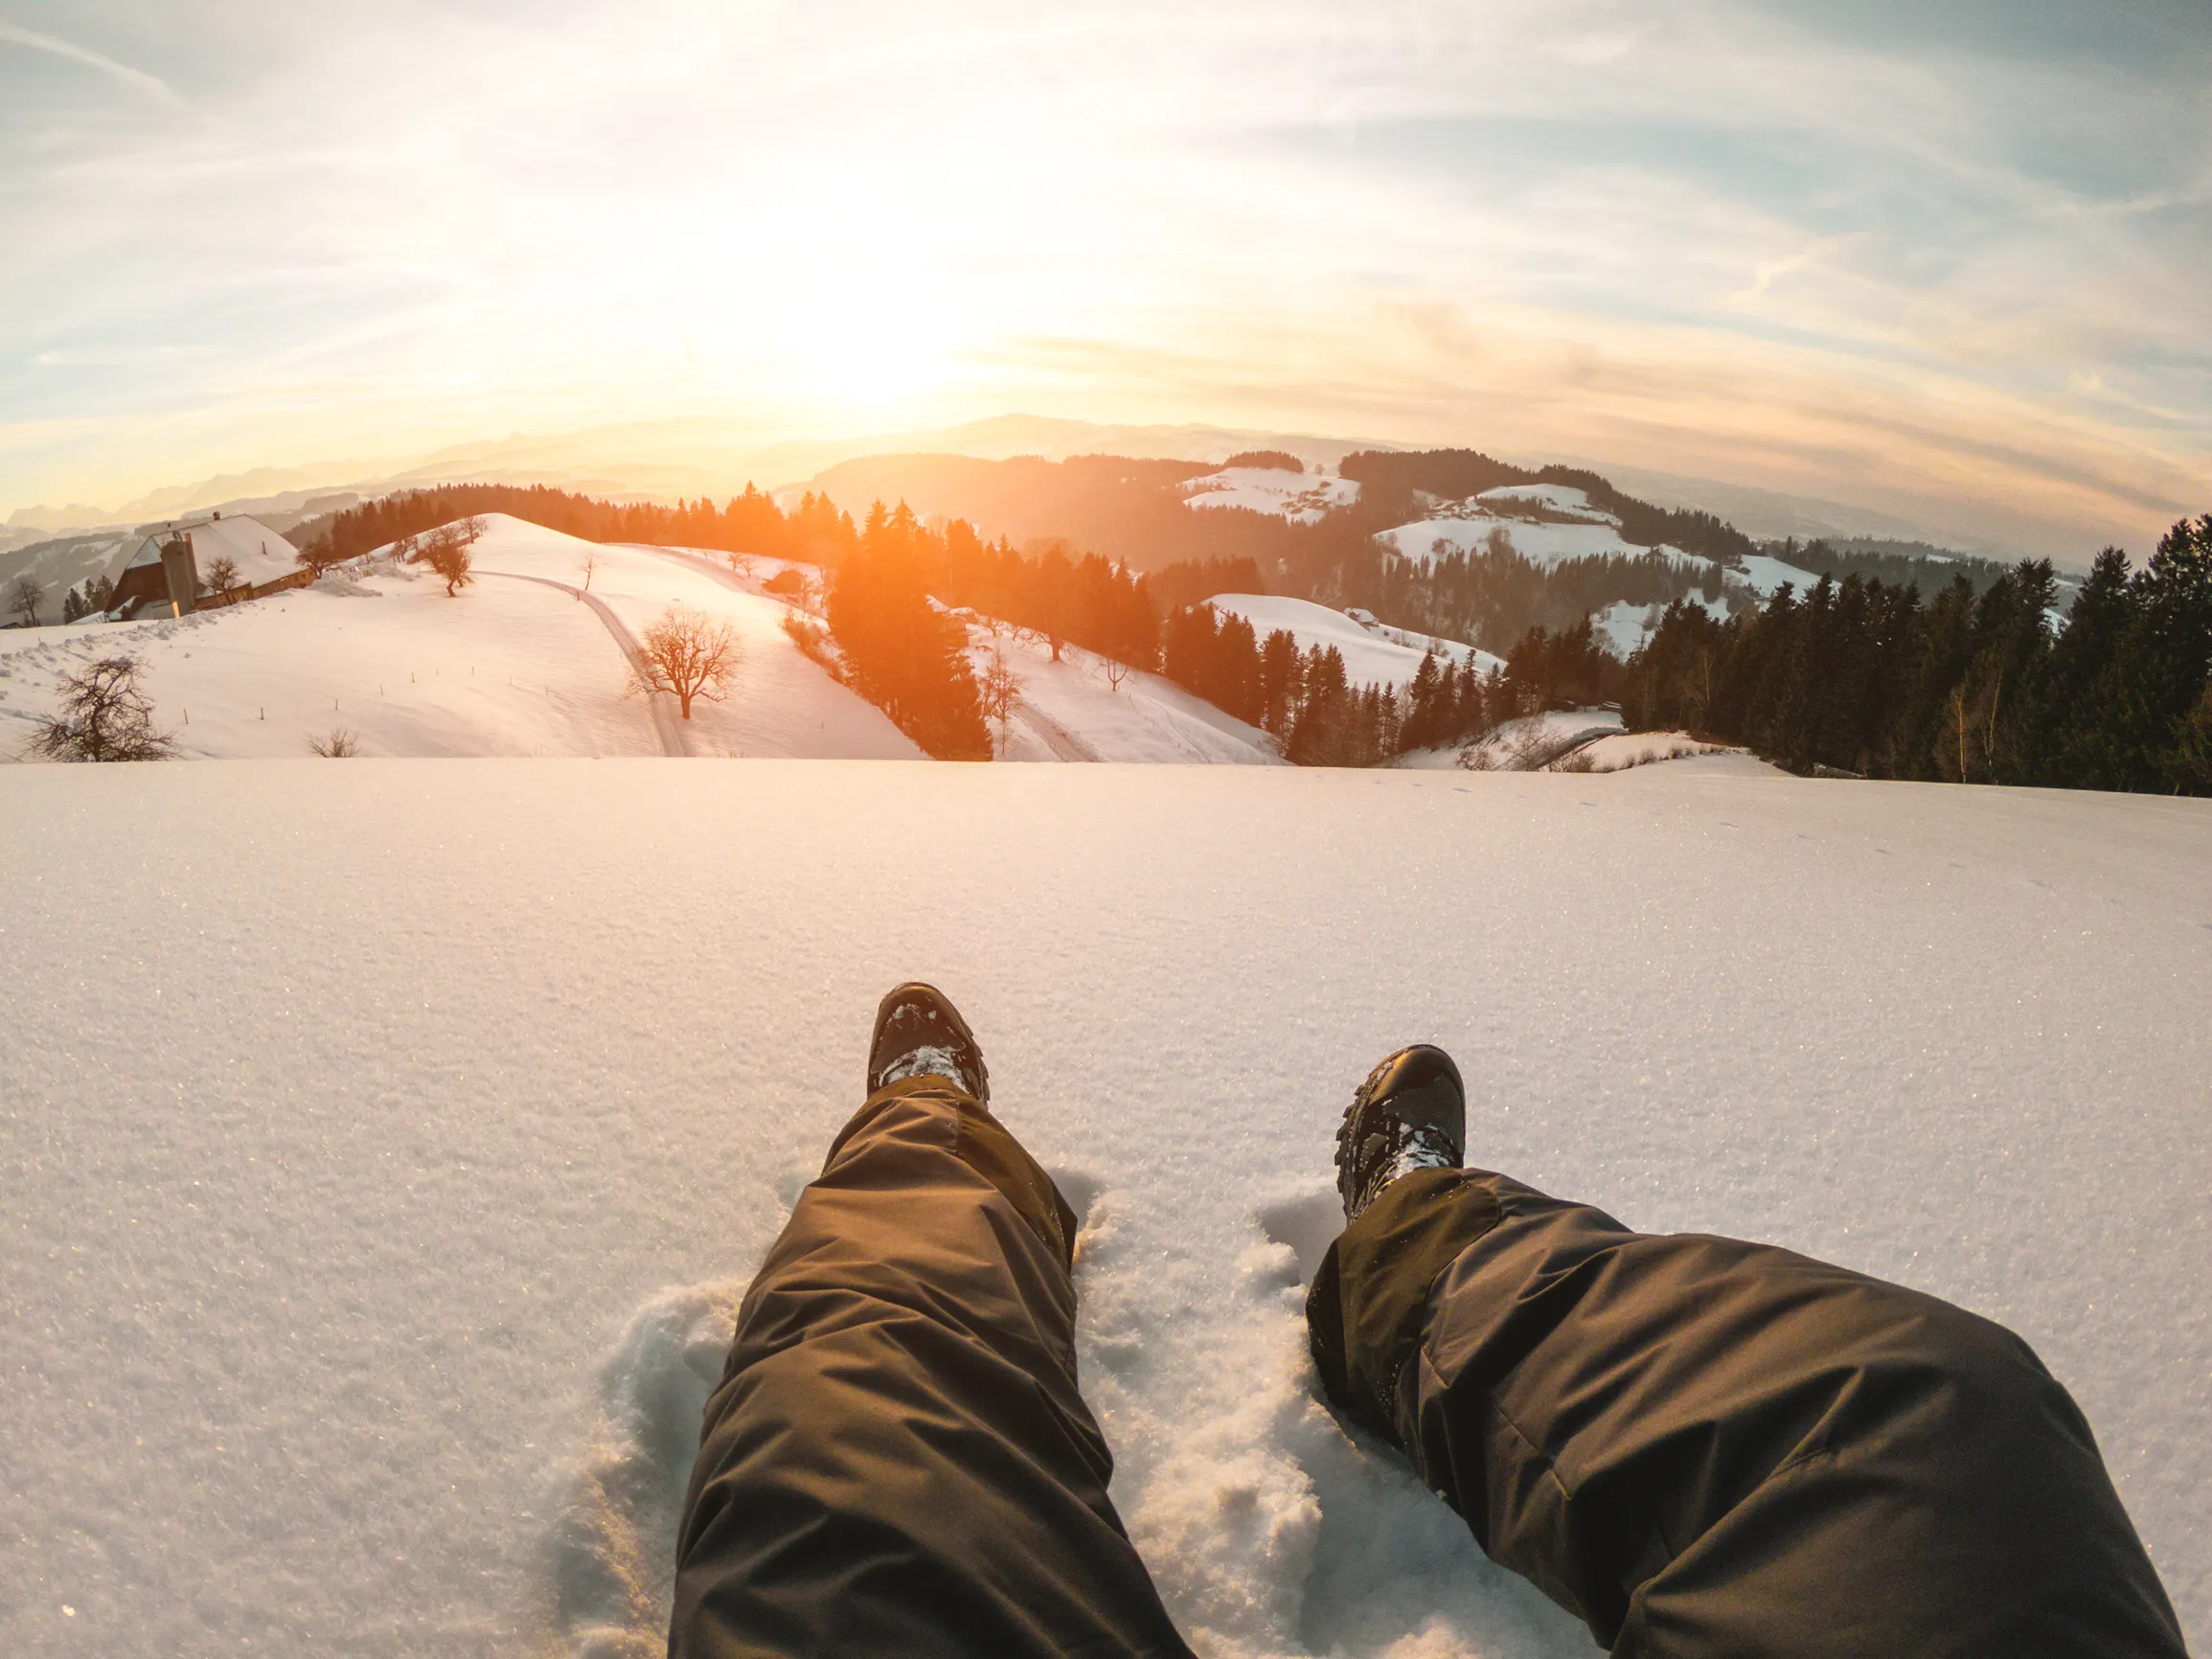 Pov of young man looking the sunset on snow high mountains - Winter vacation concept - Focus on his feet